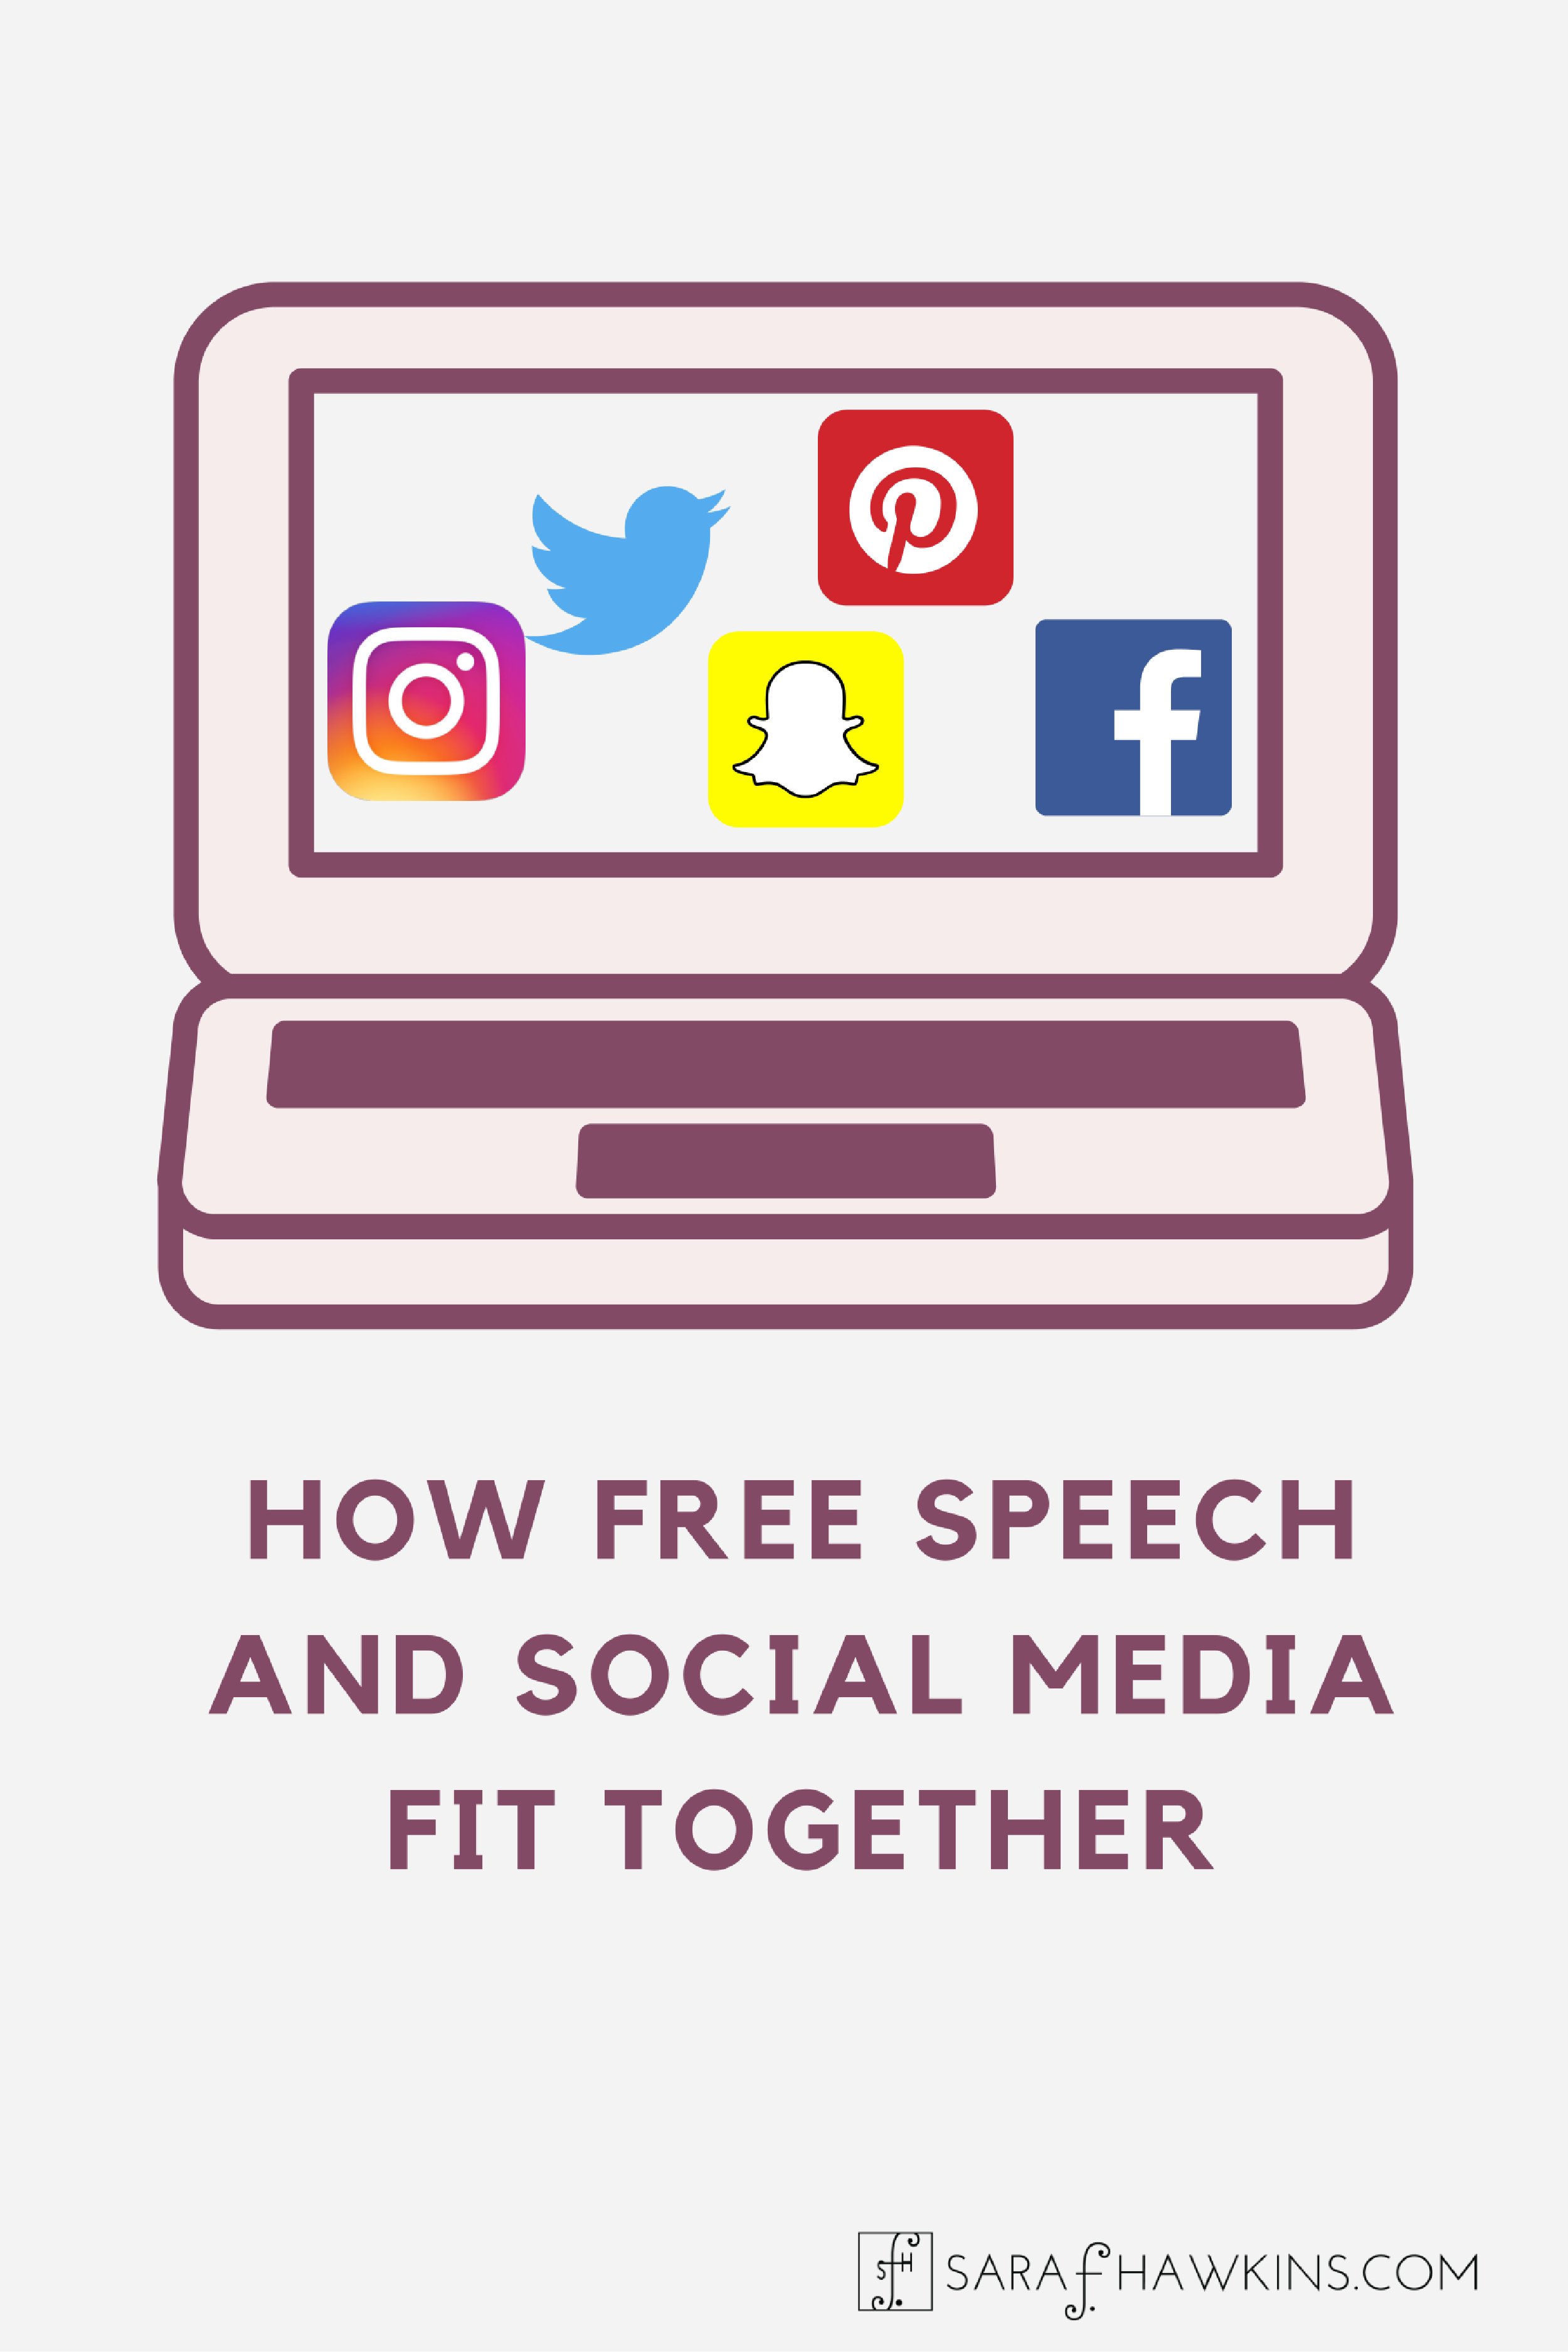 How Free Speech and Social Media Fit Together